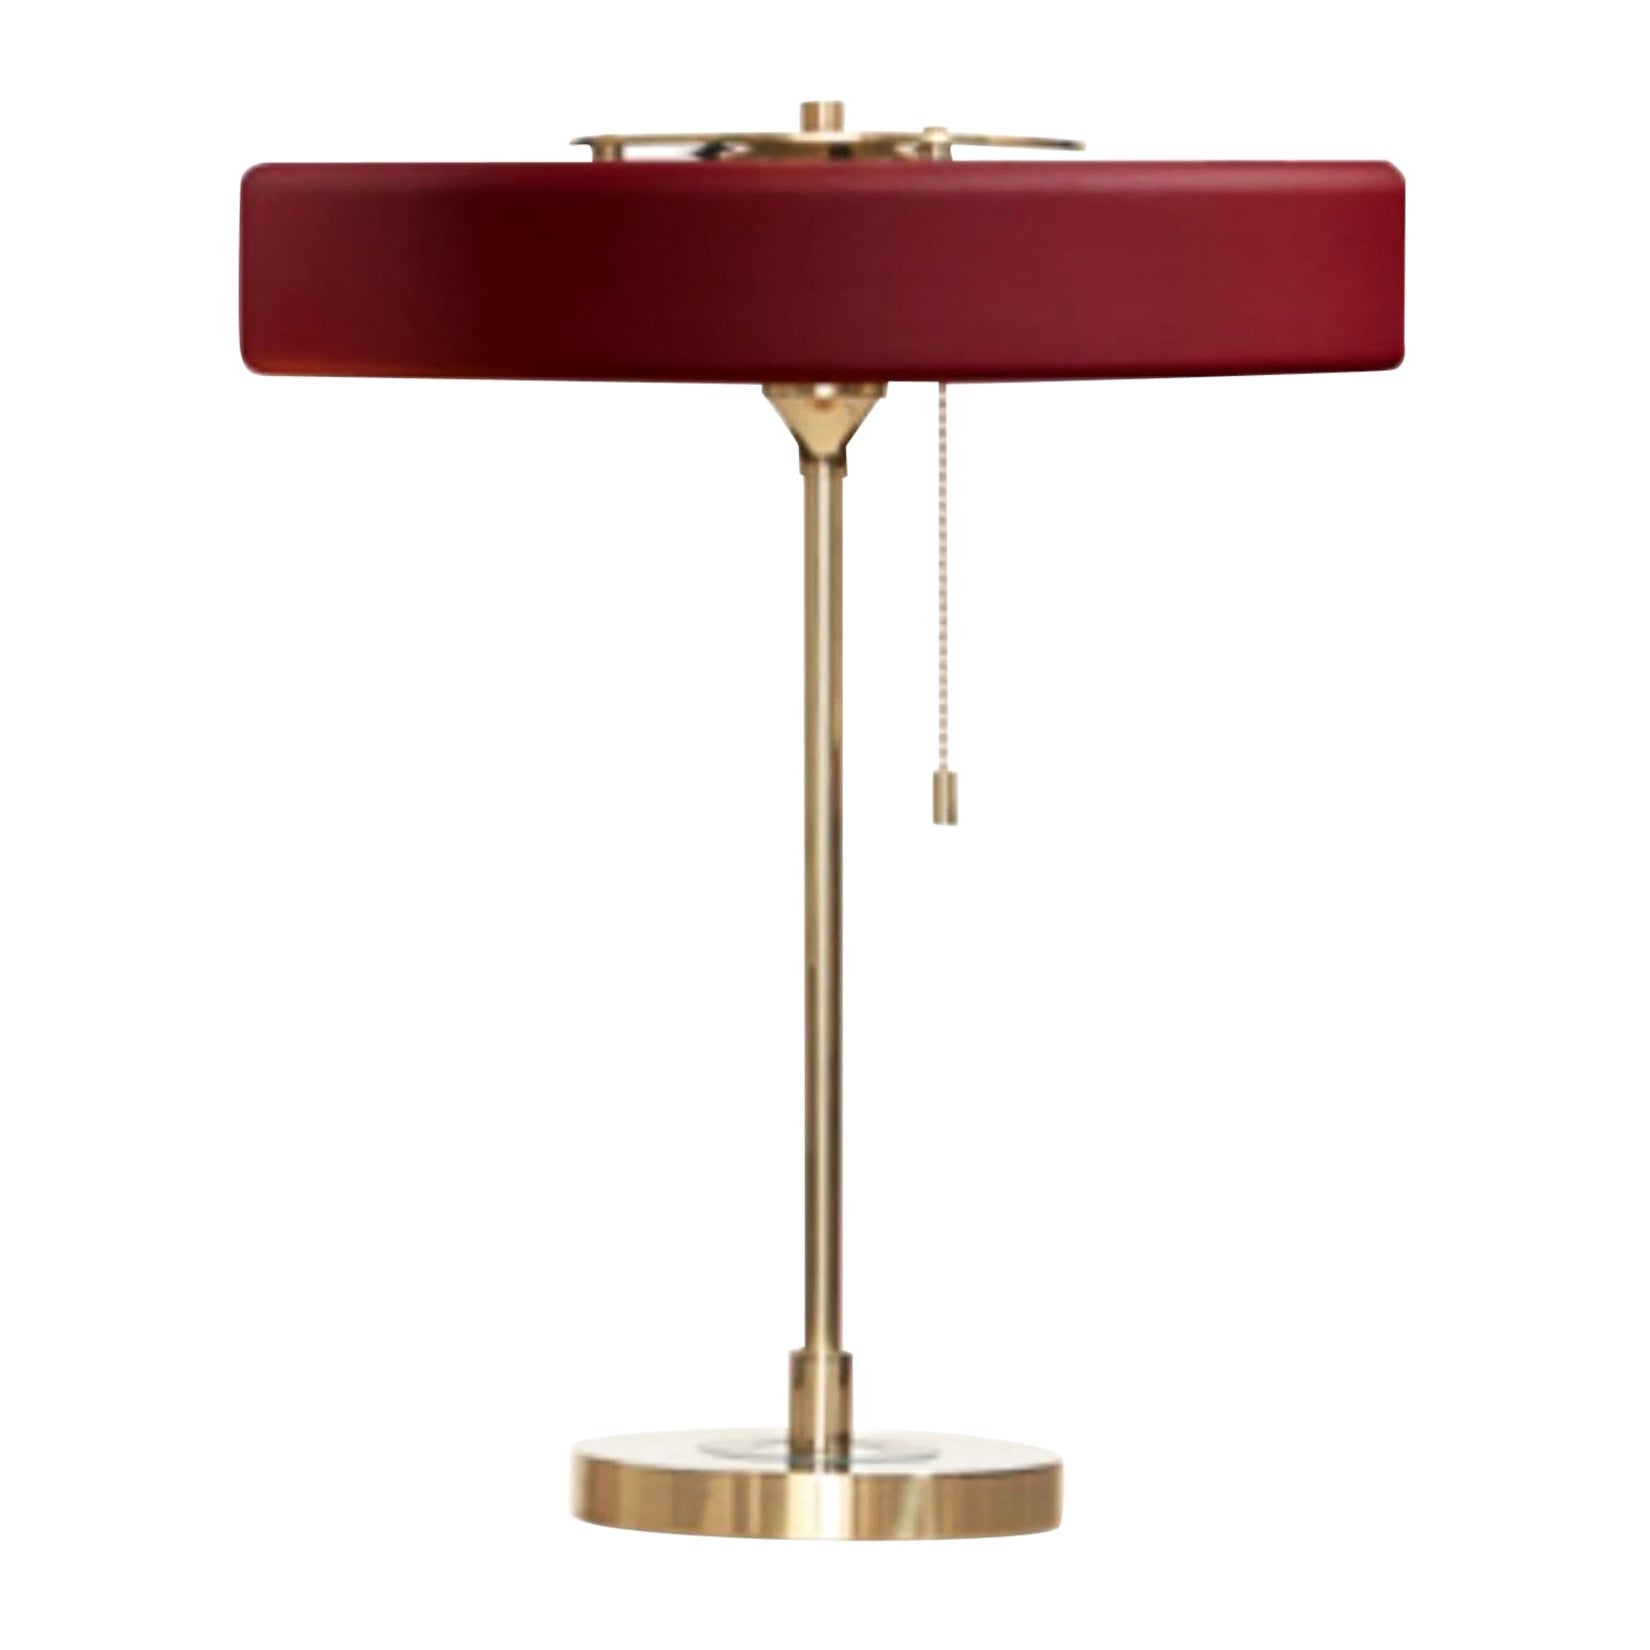 Revolve Table Lamp, Brushed Brass, Oxblood by Bert Frank